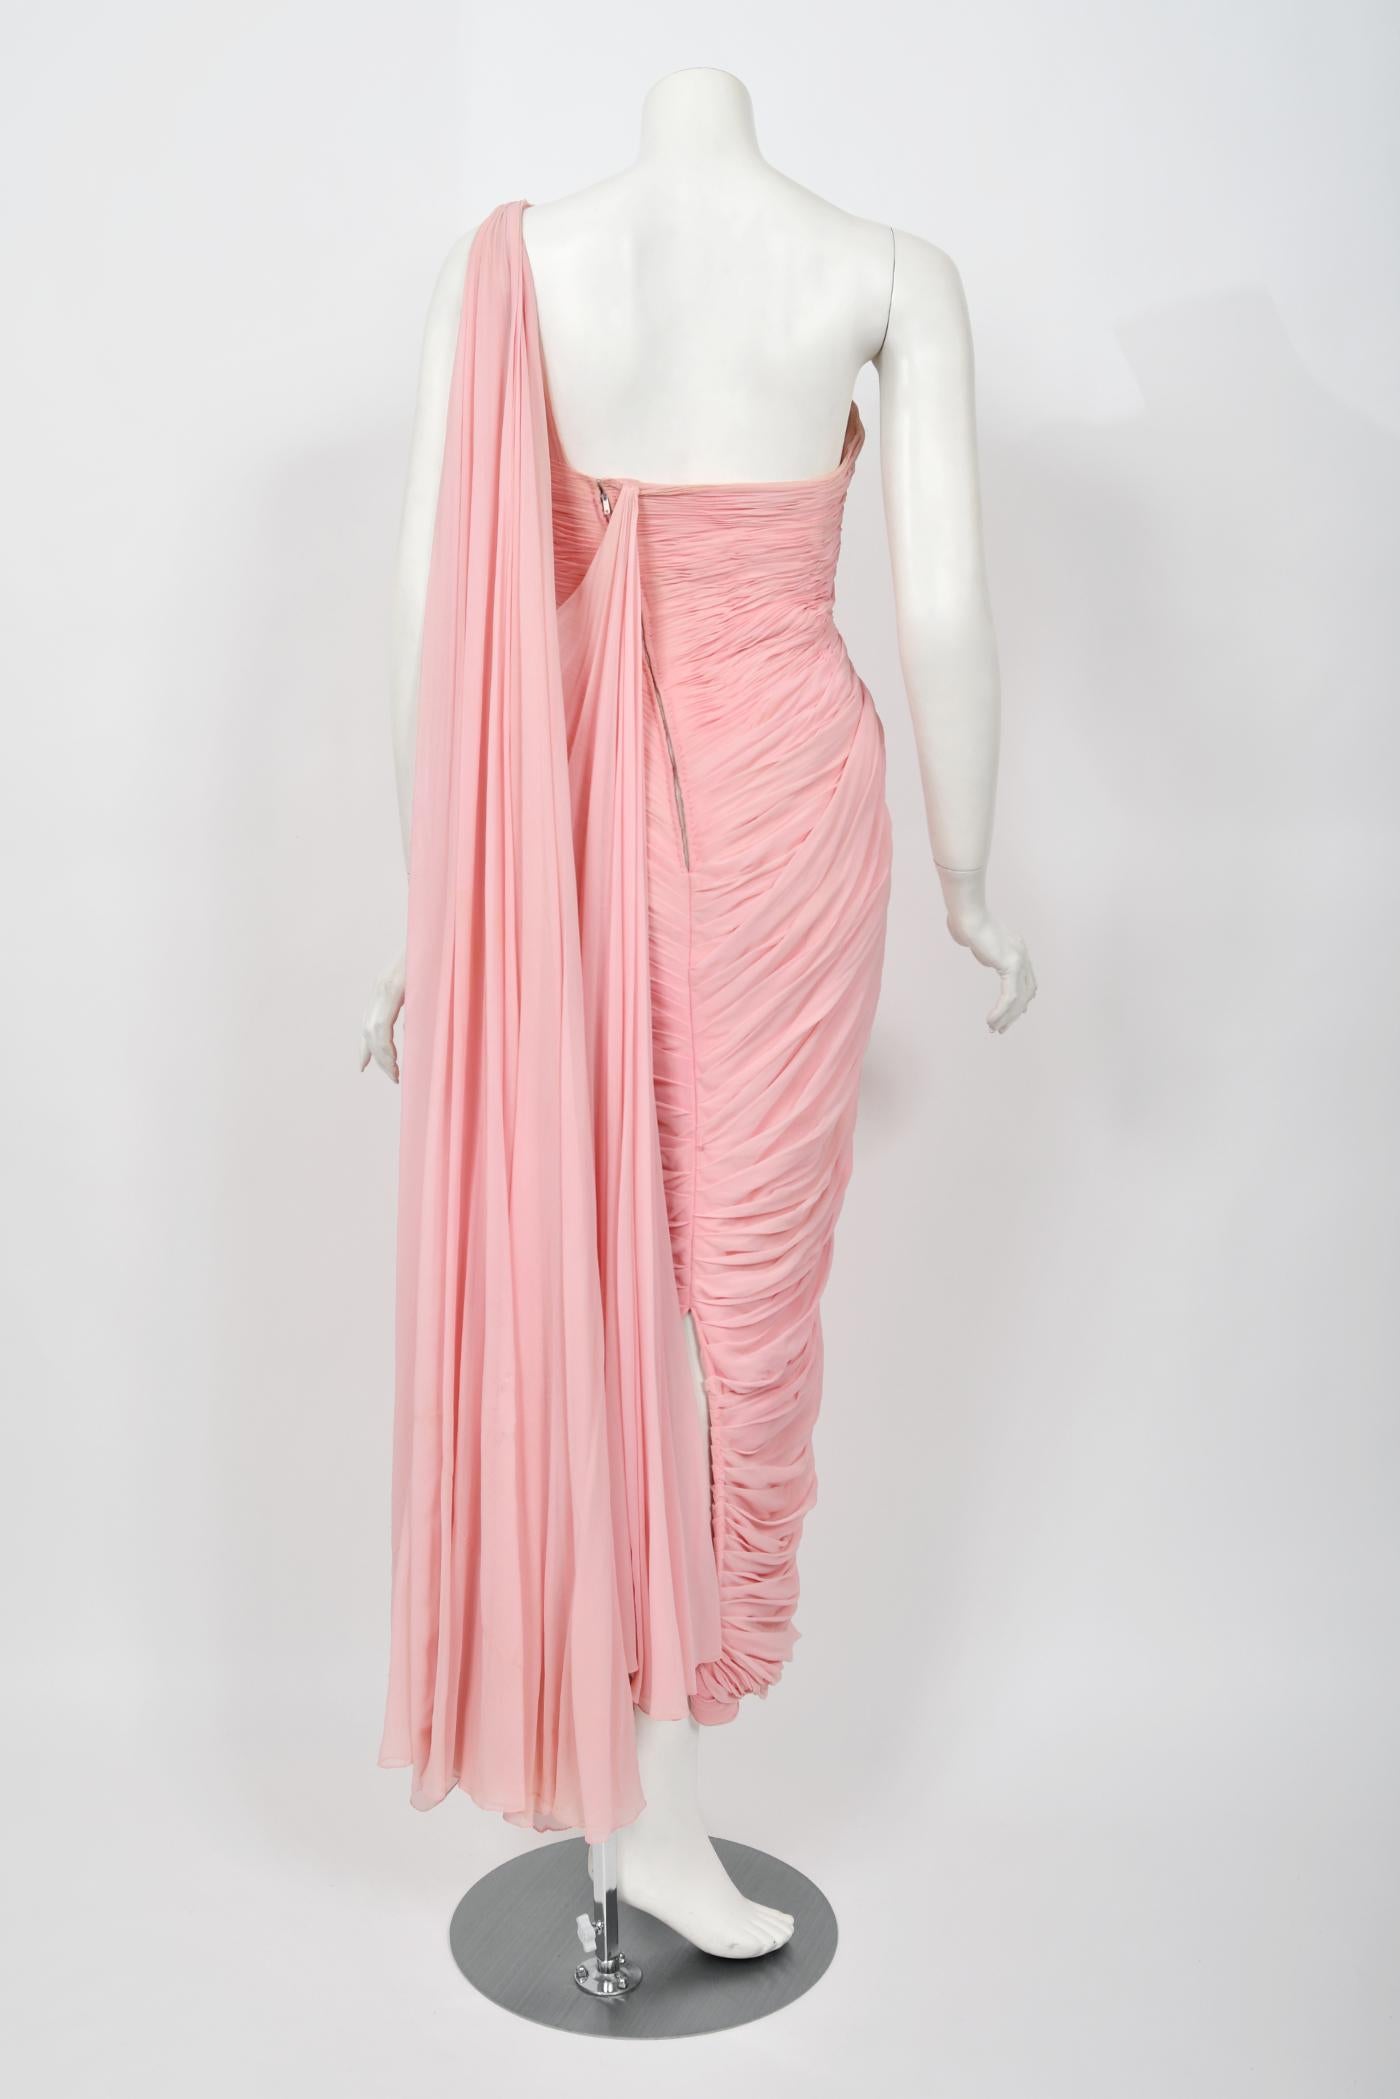 1958 Jean Dessès Haute Couture Documented Pink Ruched Silk Chiffon Goddess Gown For Sale 9